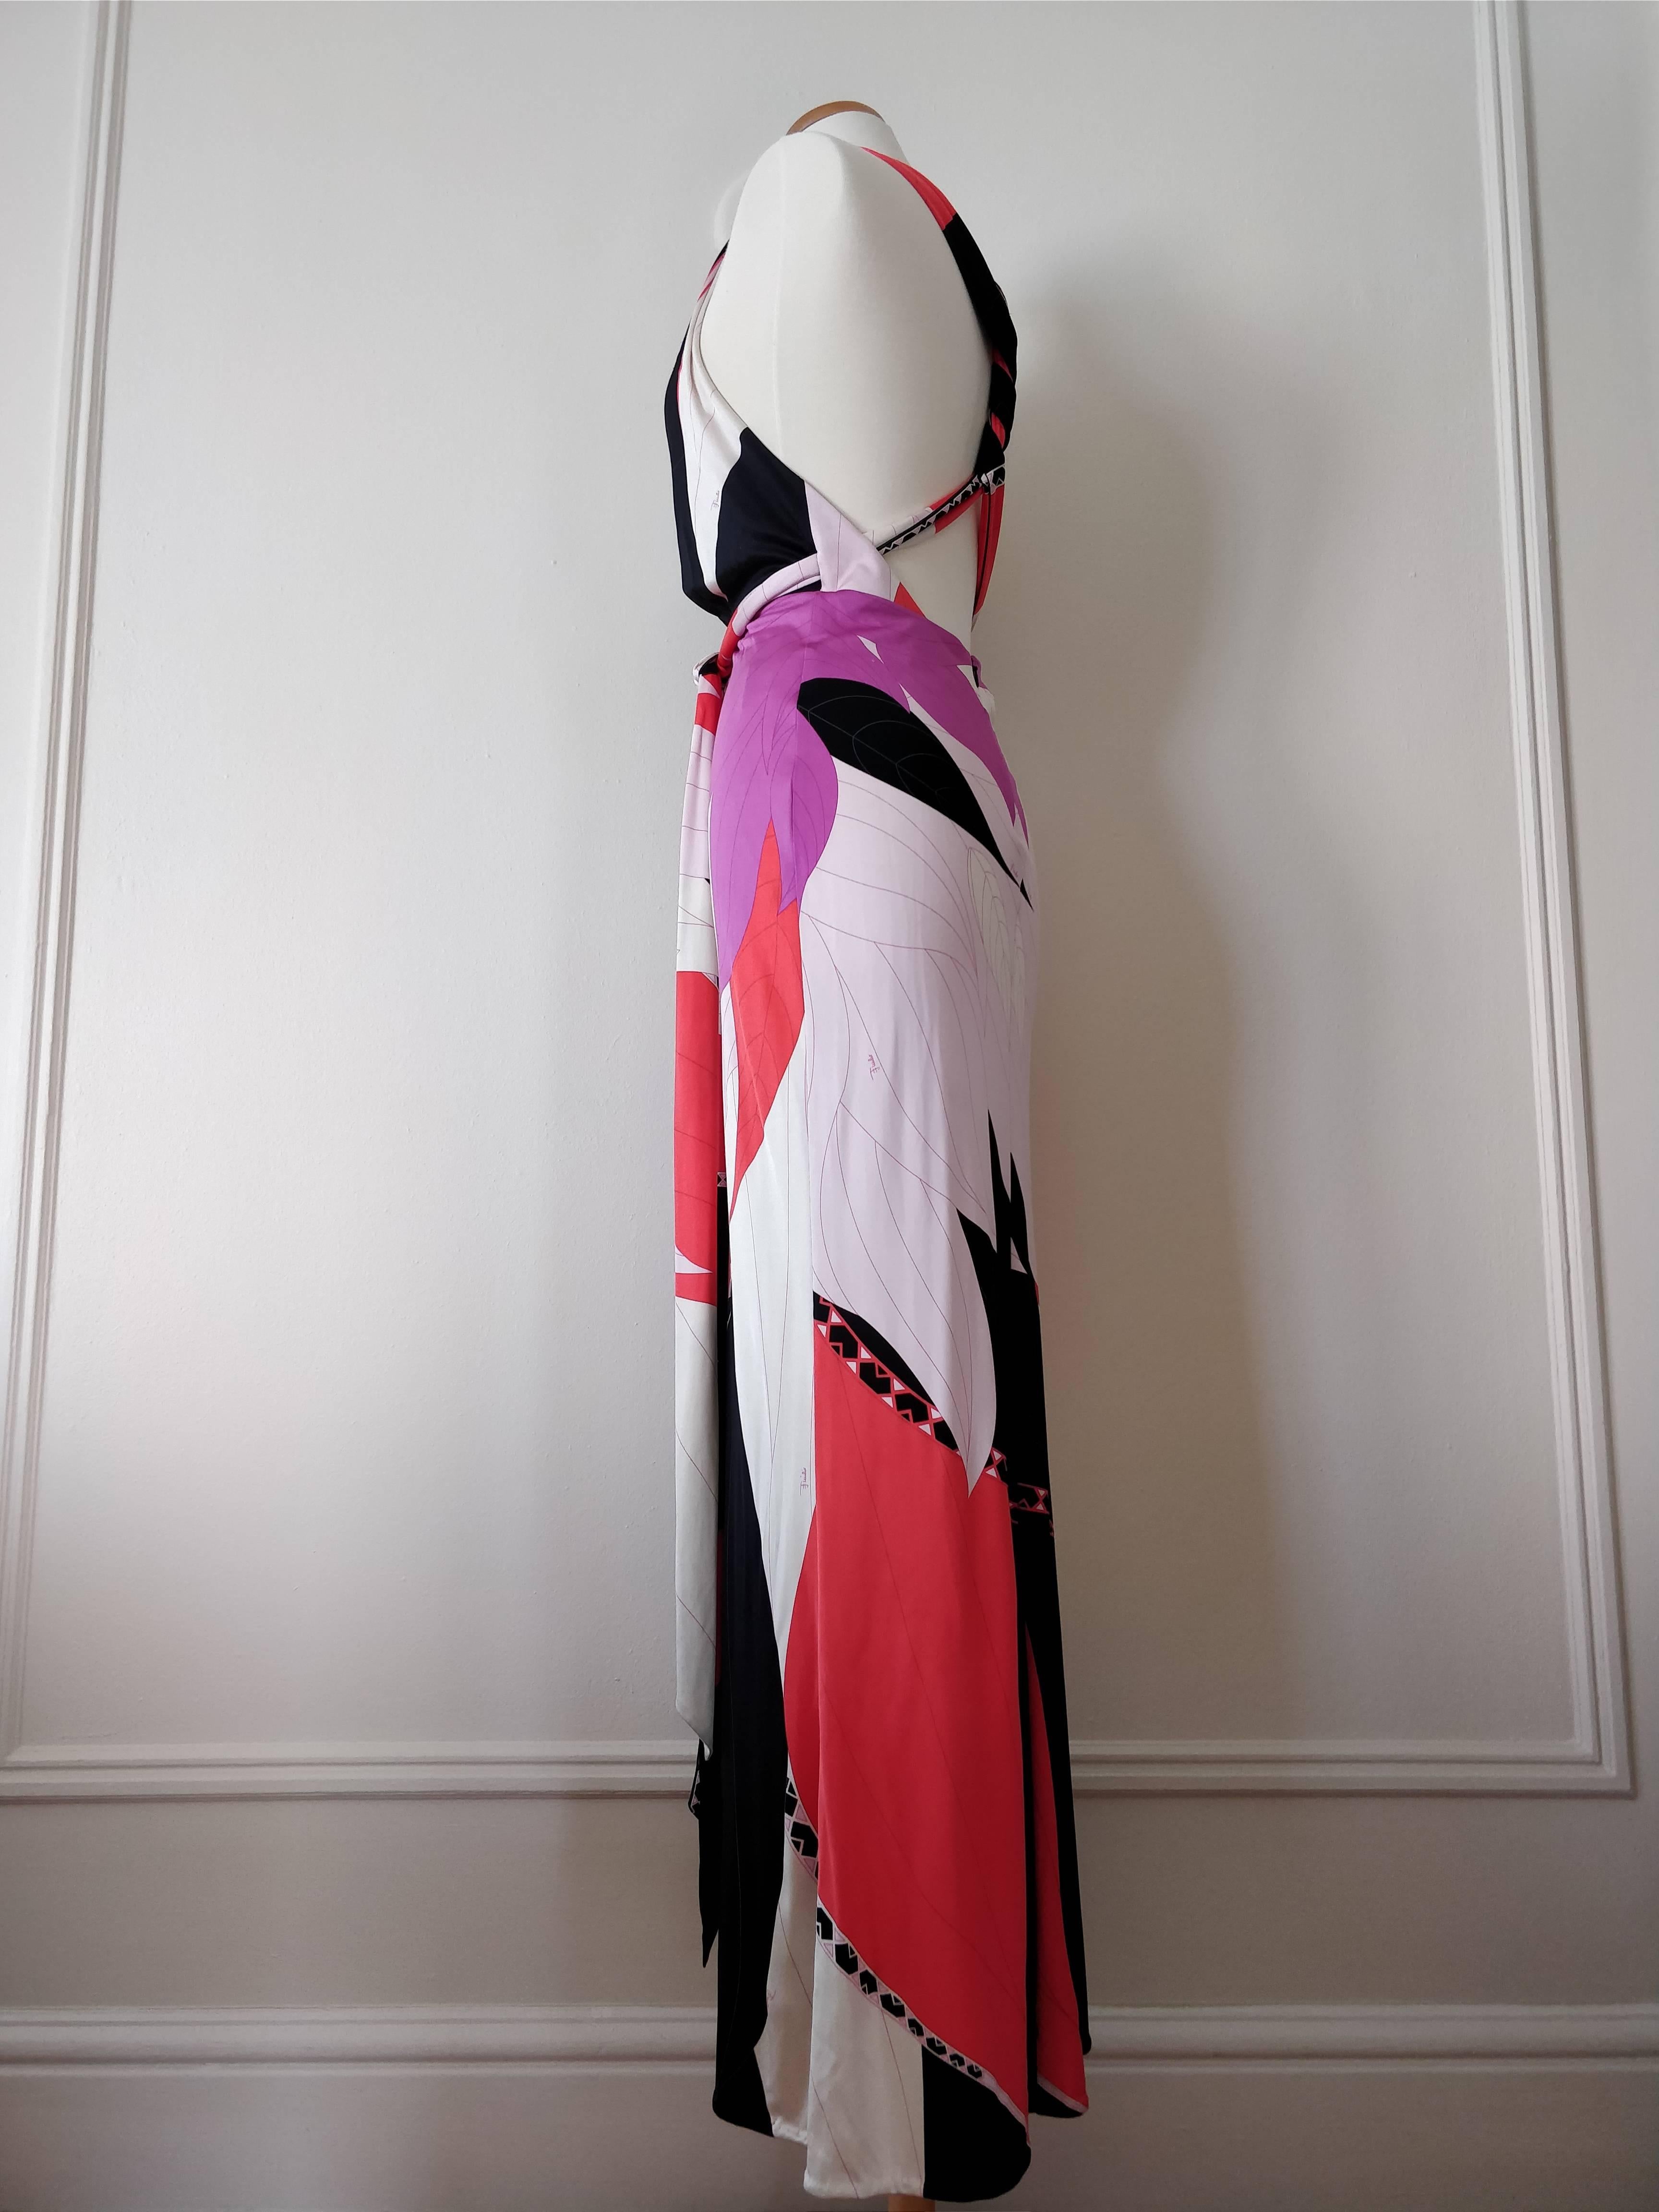 An Emilio Pucci silk jersey maxi dress in black, white, fuchsia and red with a halter neckline, twisted straps across a low-cut back and long tie.  Zipper at back. 